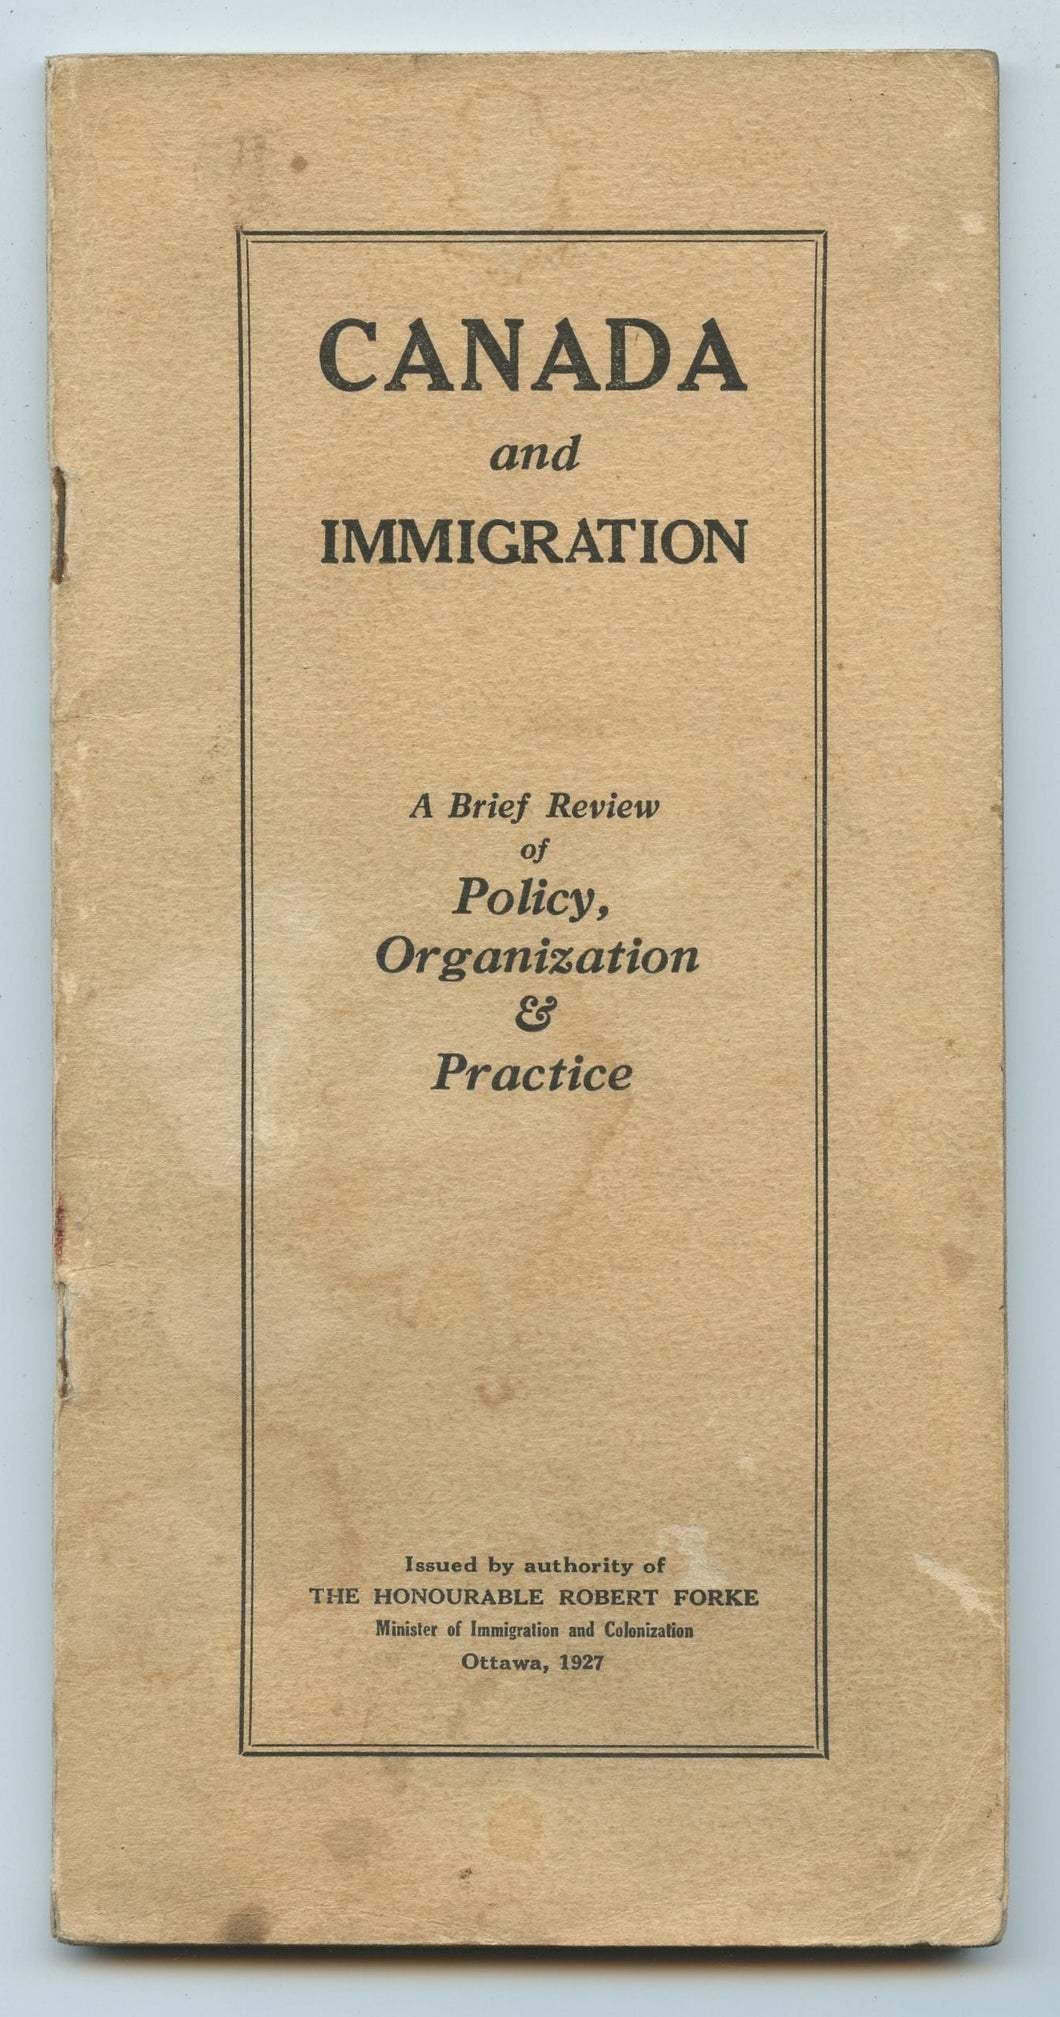 Canada and Immigration: A Brief Review of Policy, Organization & Practice